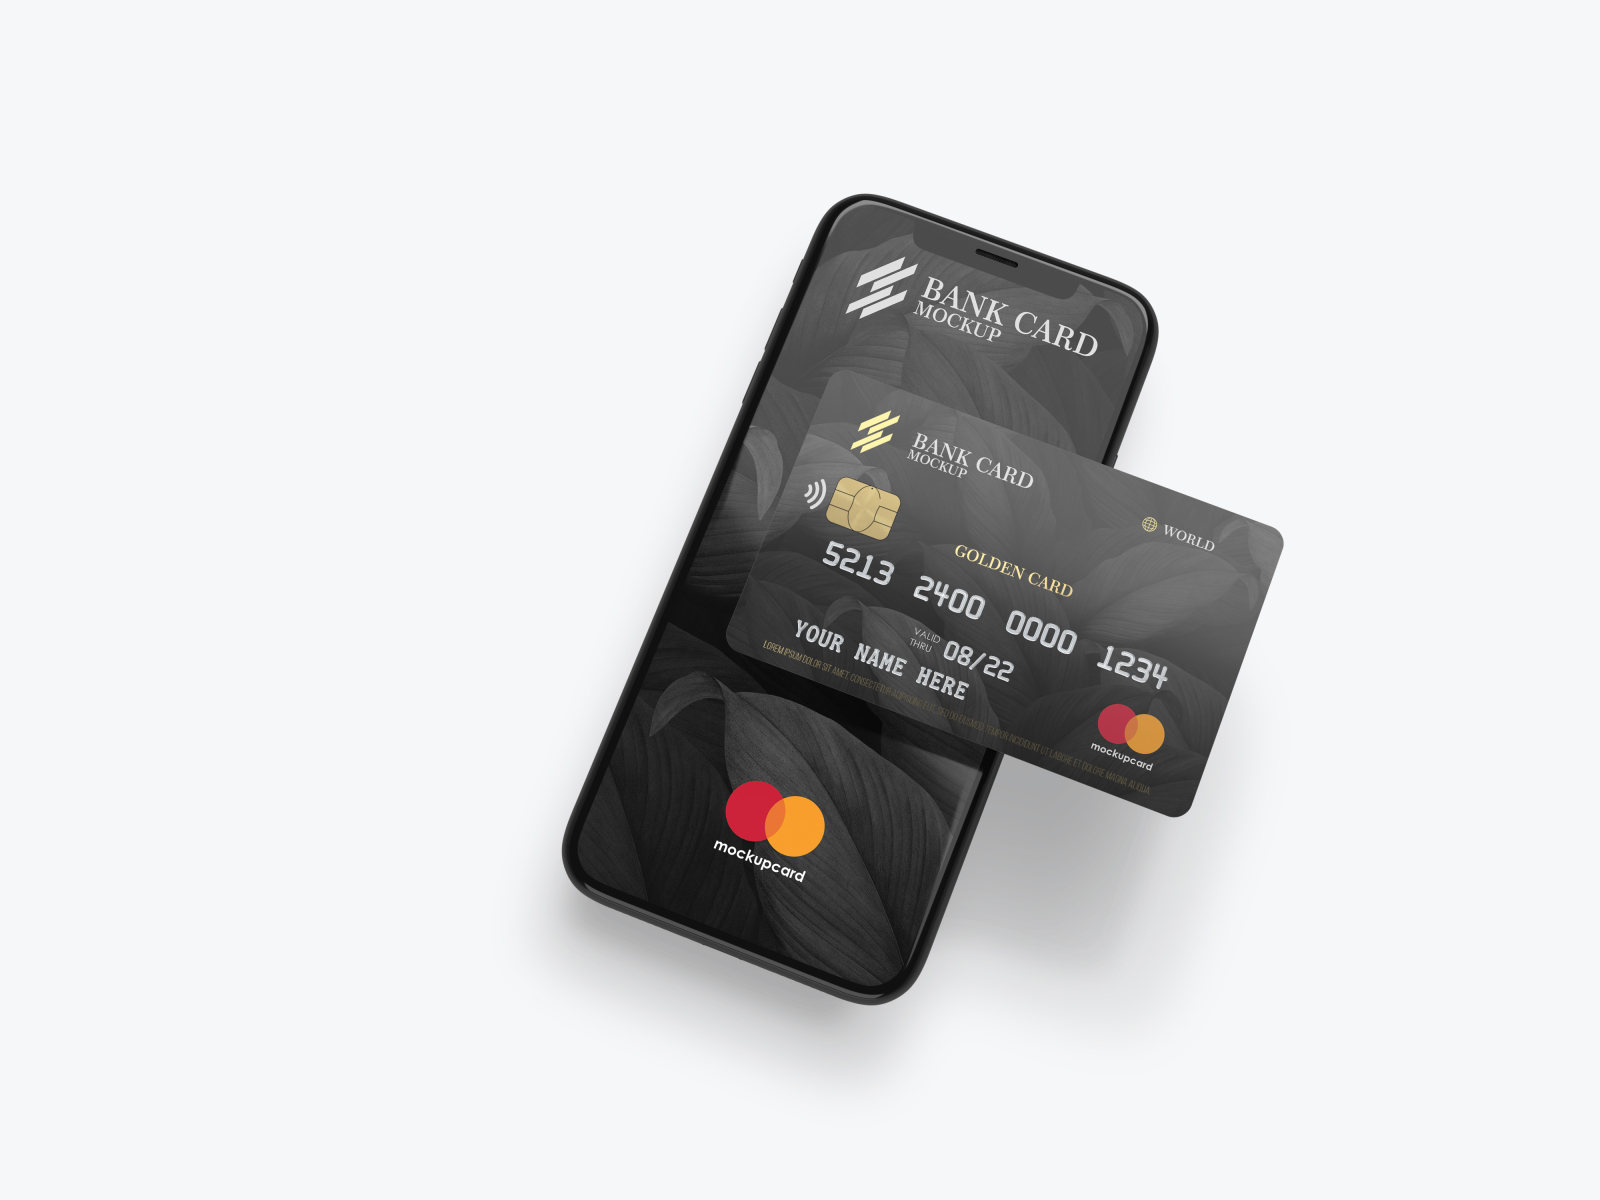 Download Plastic Card Mockup By Seven Lights On Dribbble PSD Mockup Templates